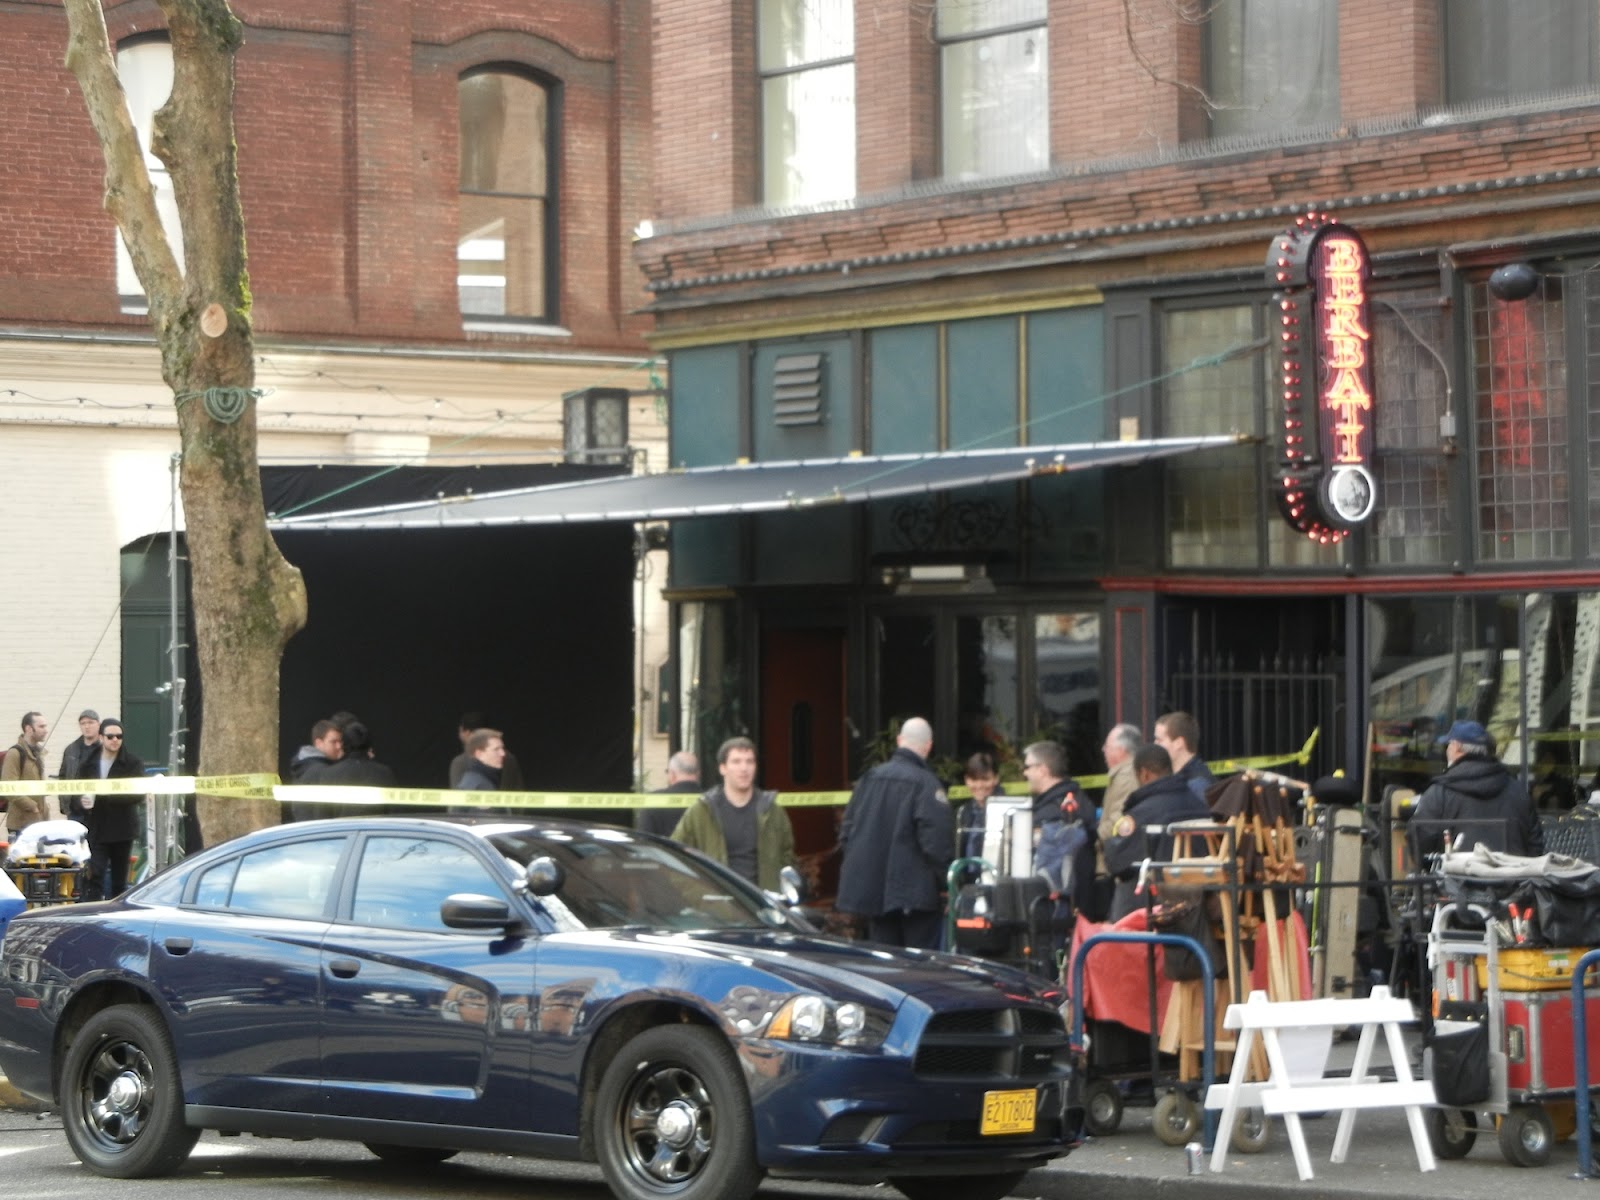 South Waterfront blog: Grimm Episode 18 Portland filming locations1600 x 1200